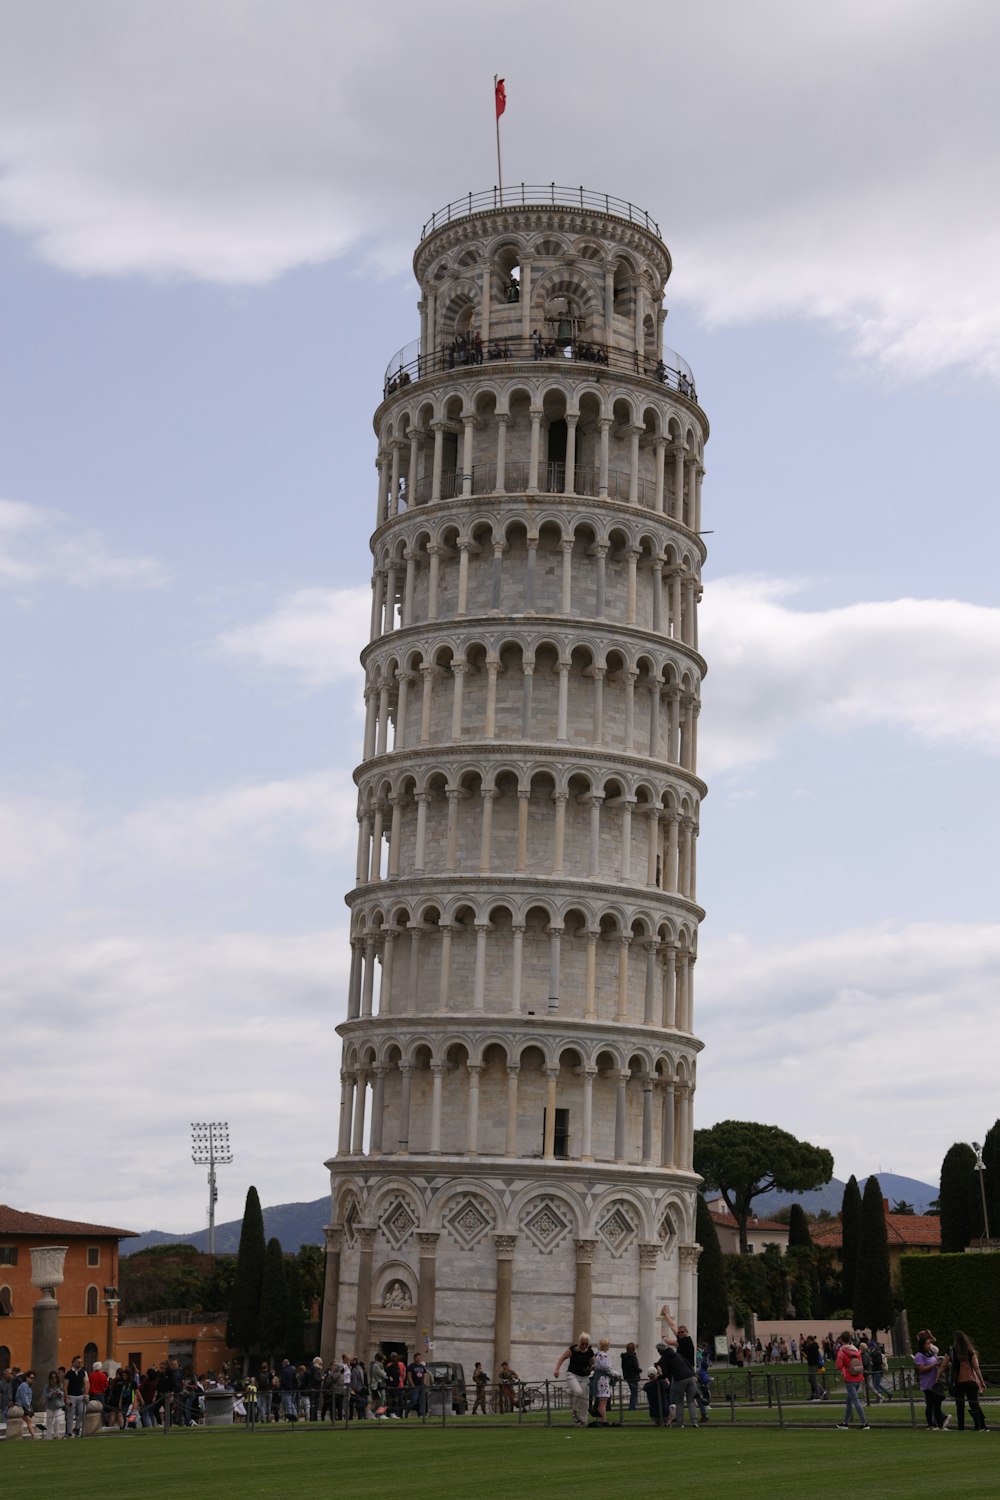 a tall tower with people around it with Leaning Tower of Pisa in the background